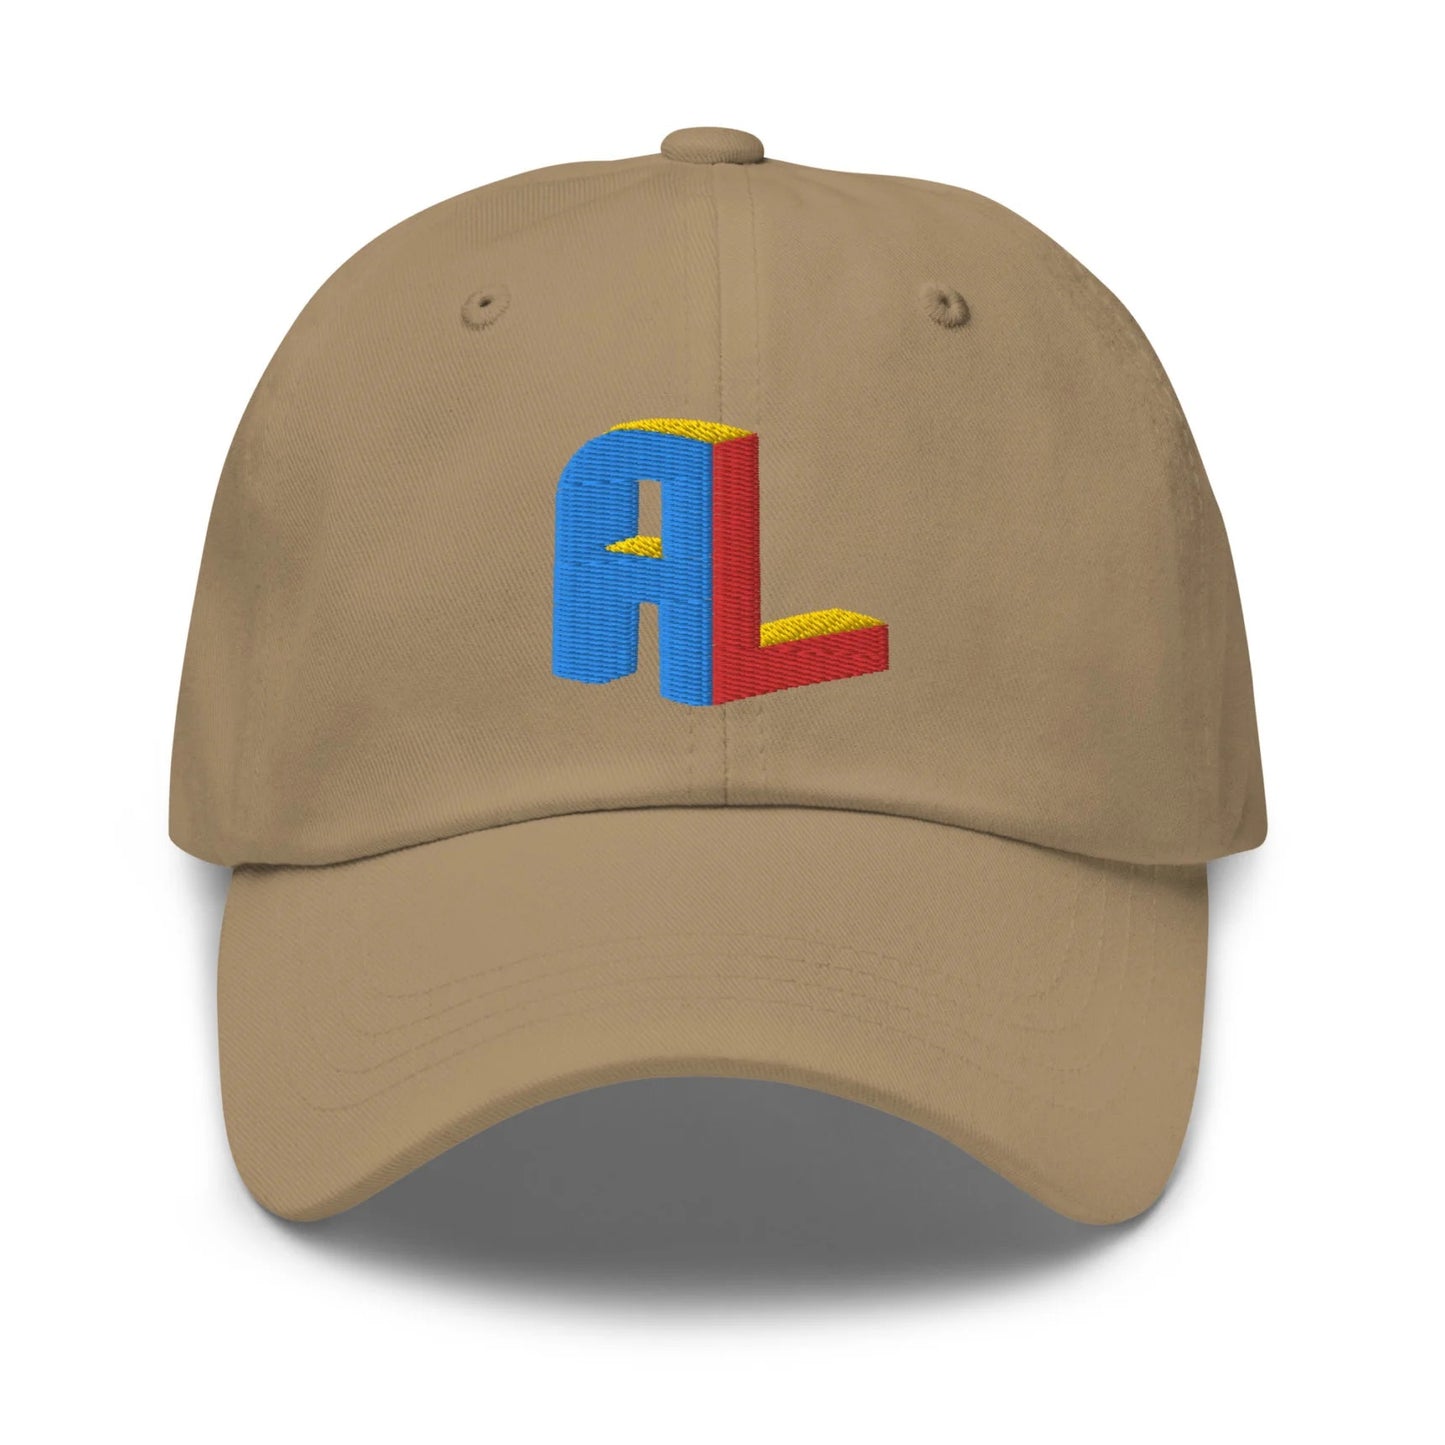 Ance Larmstrong ShowZone baseball dad hat in khaki beige colour